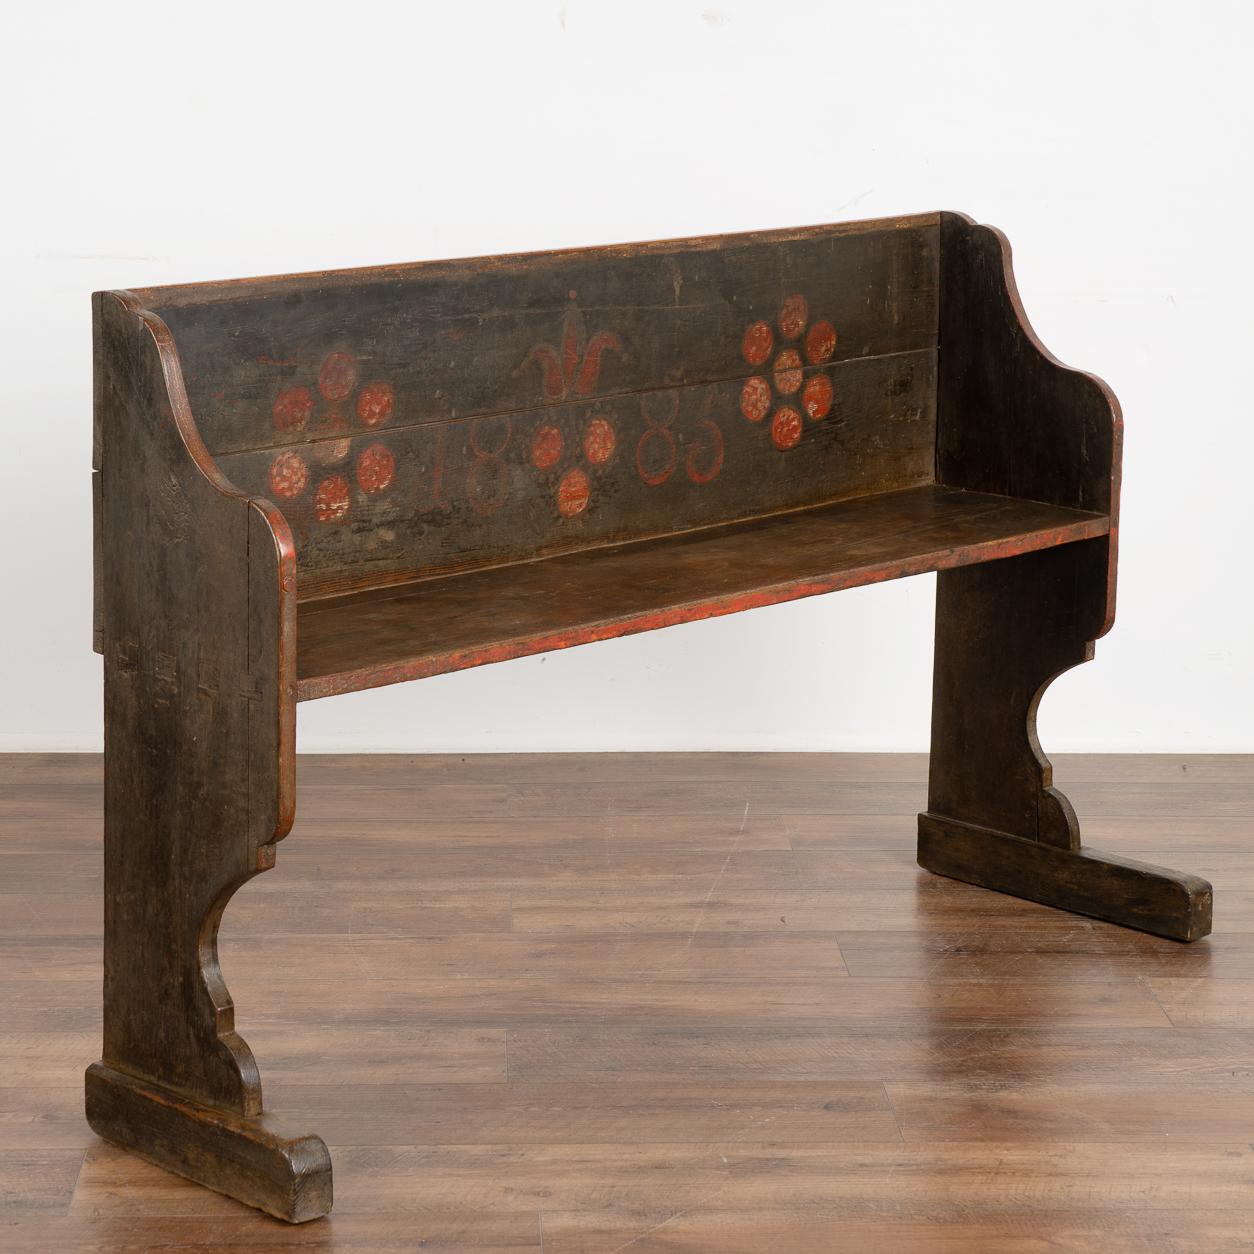 This narrow bench is a fun find due to its unique smaller scale at just over 4.5' long, perfect for a small mud room, entryway or hallway.
Original hand painted details include red flowers, date of 1883 and overall dark brownish green background.